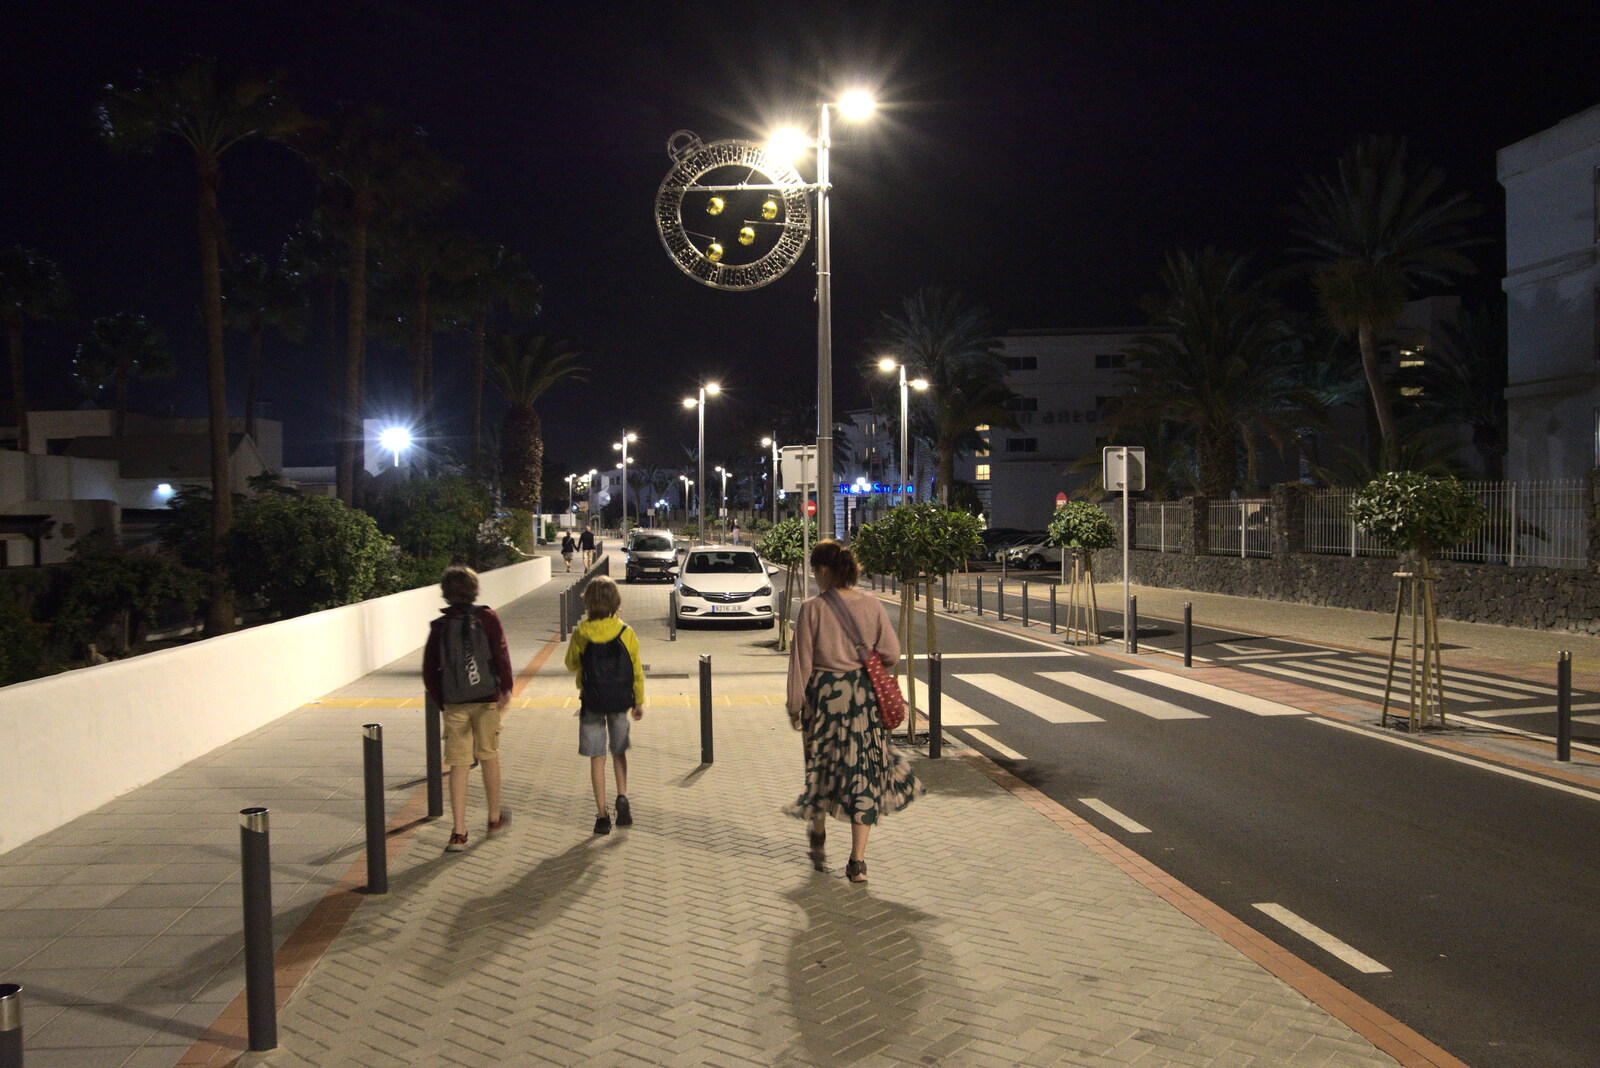 The long walk back to the apartment from Five Days in Lanzarote, Canary Islands, Spain - 24th October 2021